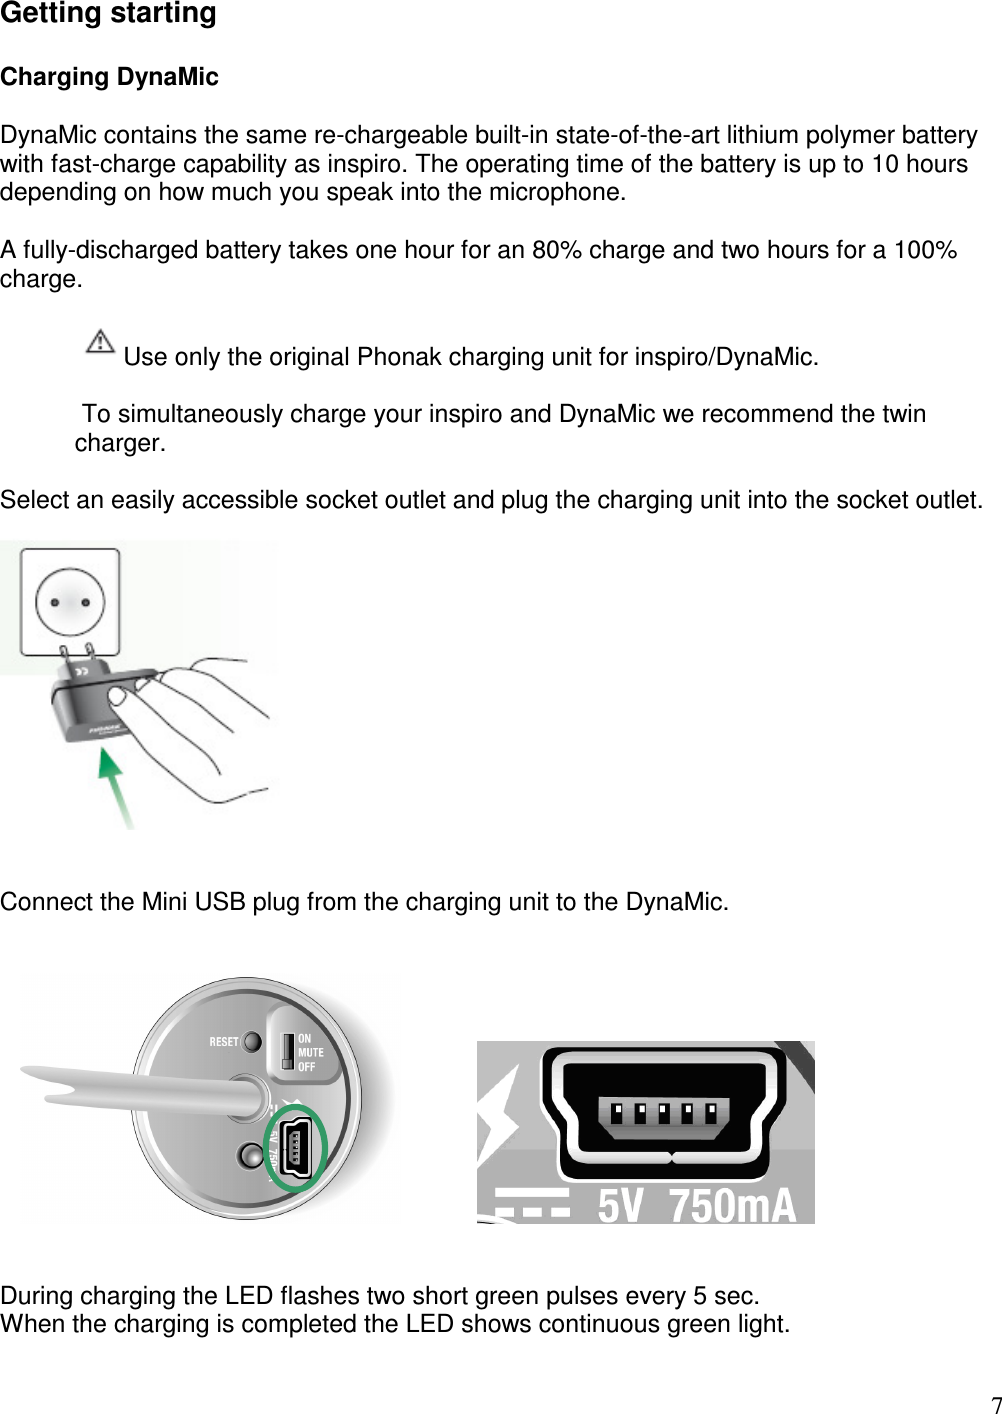   7 Getting starting  Charging DynaMic  DynaMic contains the same re-chargeable built-in state-of-the-art lithium polymer battery with fast-charge capability as inspiro. The operating time of the battery is up to 10 hours depending on how much you speak into the microphone.   A fully-discharged battery takes one hour for an 80% charge and two hours for a 100% charge.  Use only the original Phonak charging unit for inspiro/DynaMic.   To simultaneously charge your inspiro and DynaMic we recommend the twin charger.  Select an easily accessible socket outlet and plug the charging unit into the socket outlet.     Connect the Mini USB plug from the charging unit to the DynaMic.                        During charging the LED flashes two short green pulses every 5 sec.  When the charging is completed the LED shows continuous green light. 